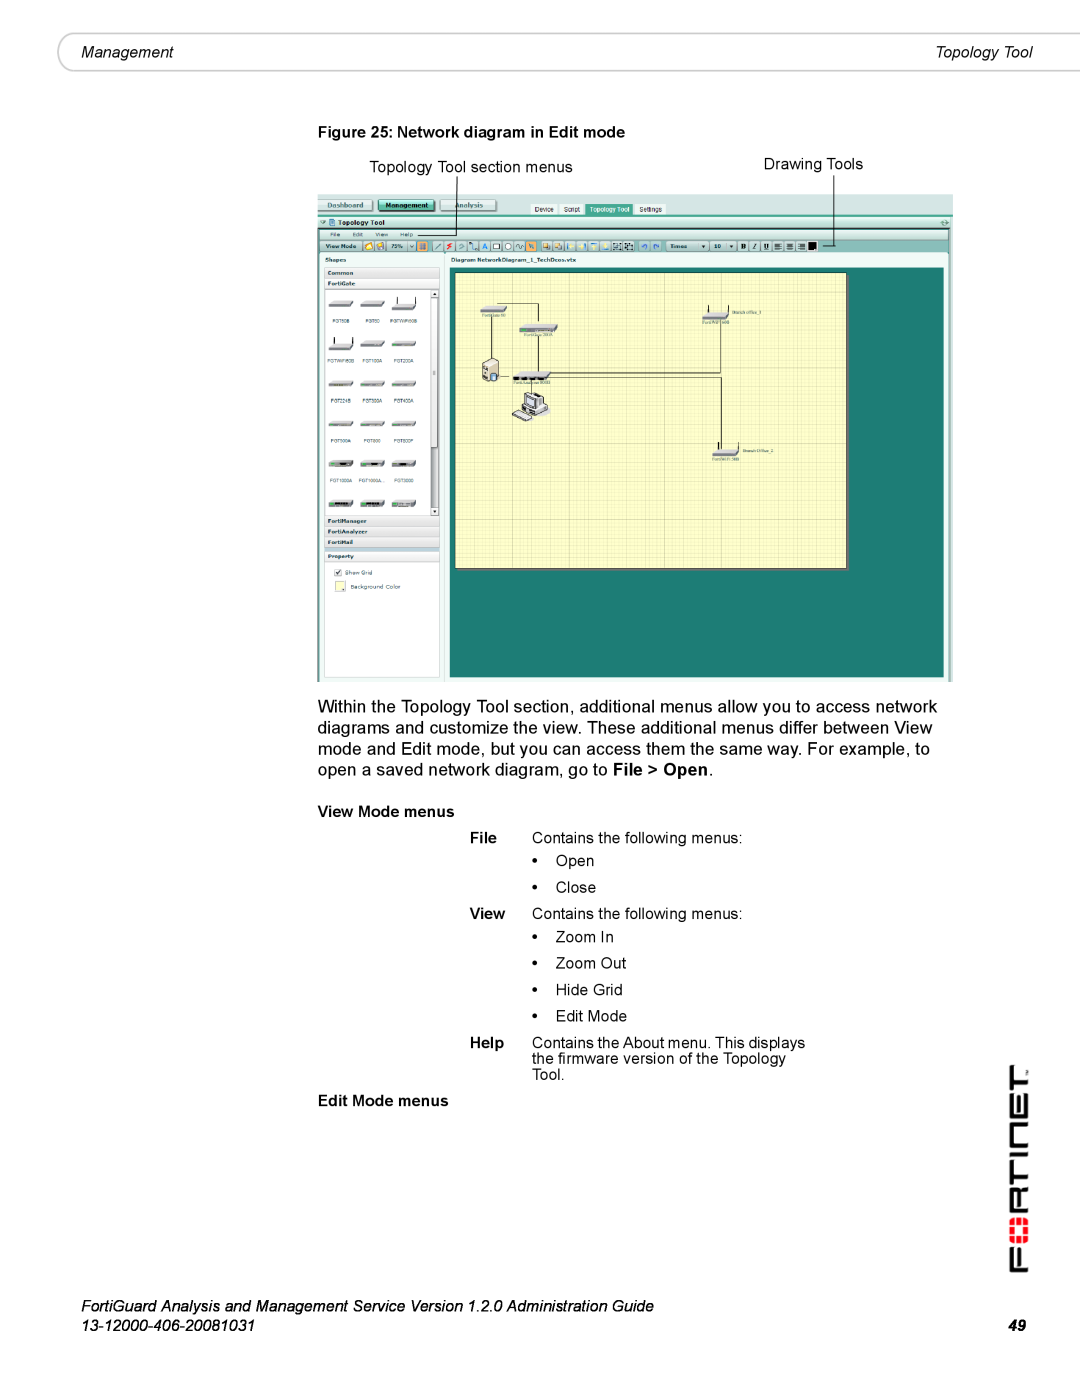 Fortinet 1.2.0 Network diagram in Edit mode, View Mode menus, File Contains the following menus Open Close, Edit Mode 